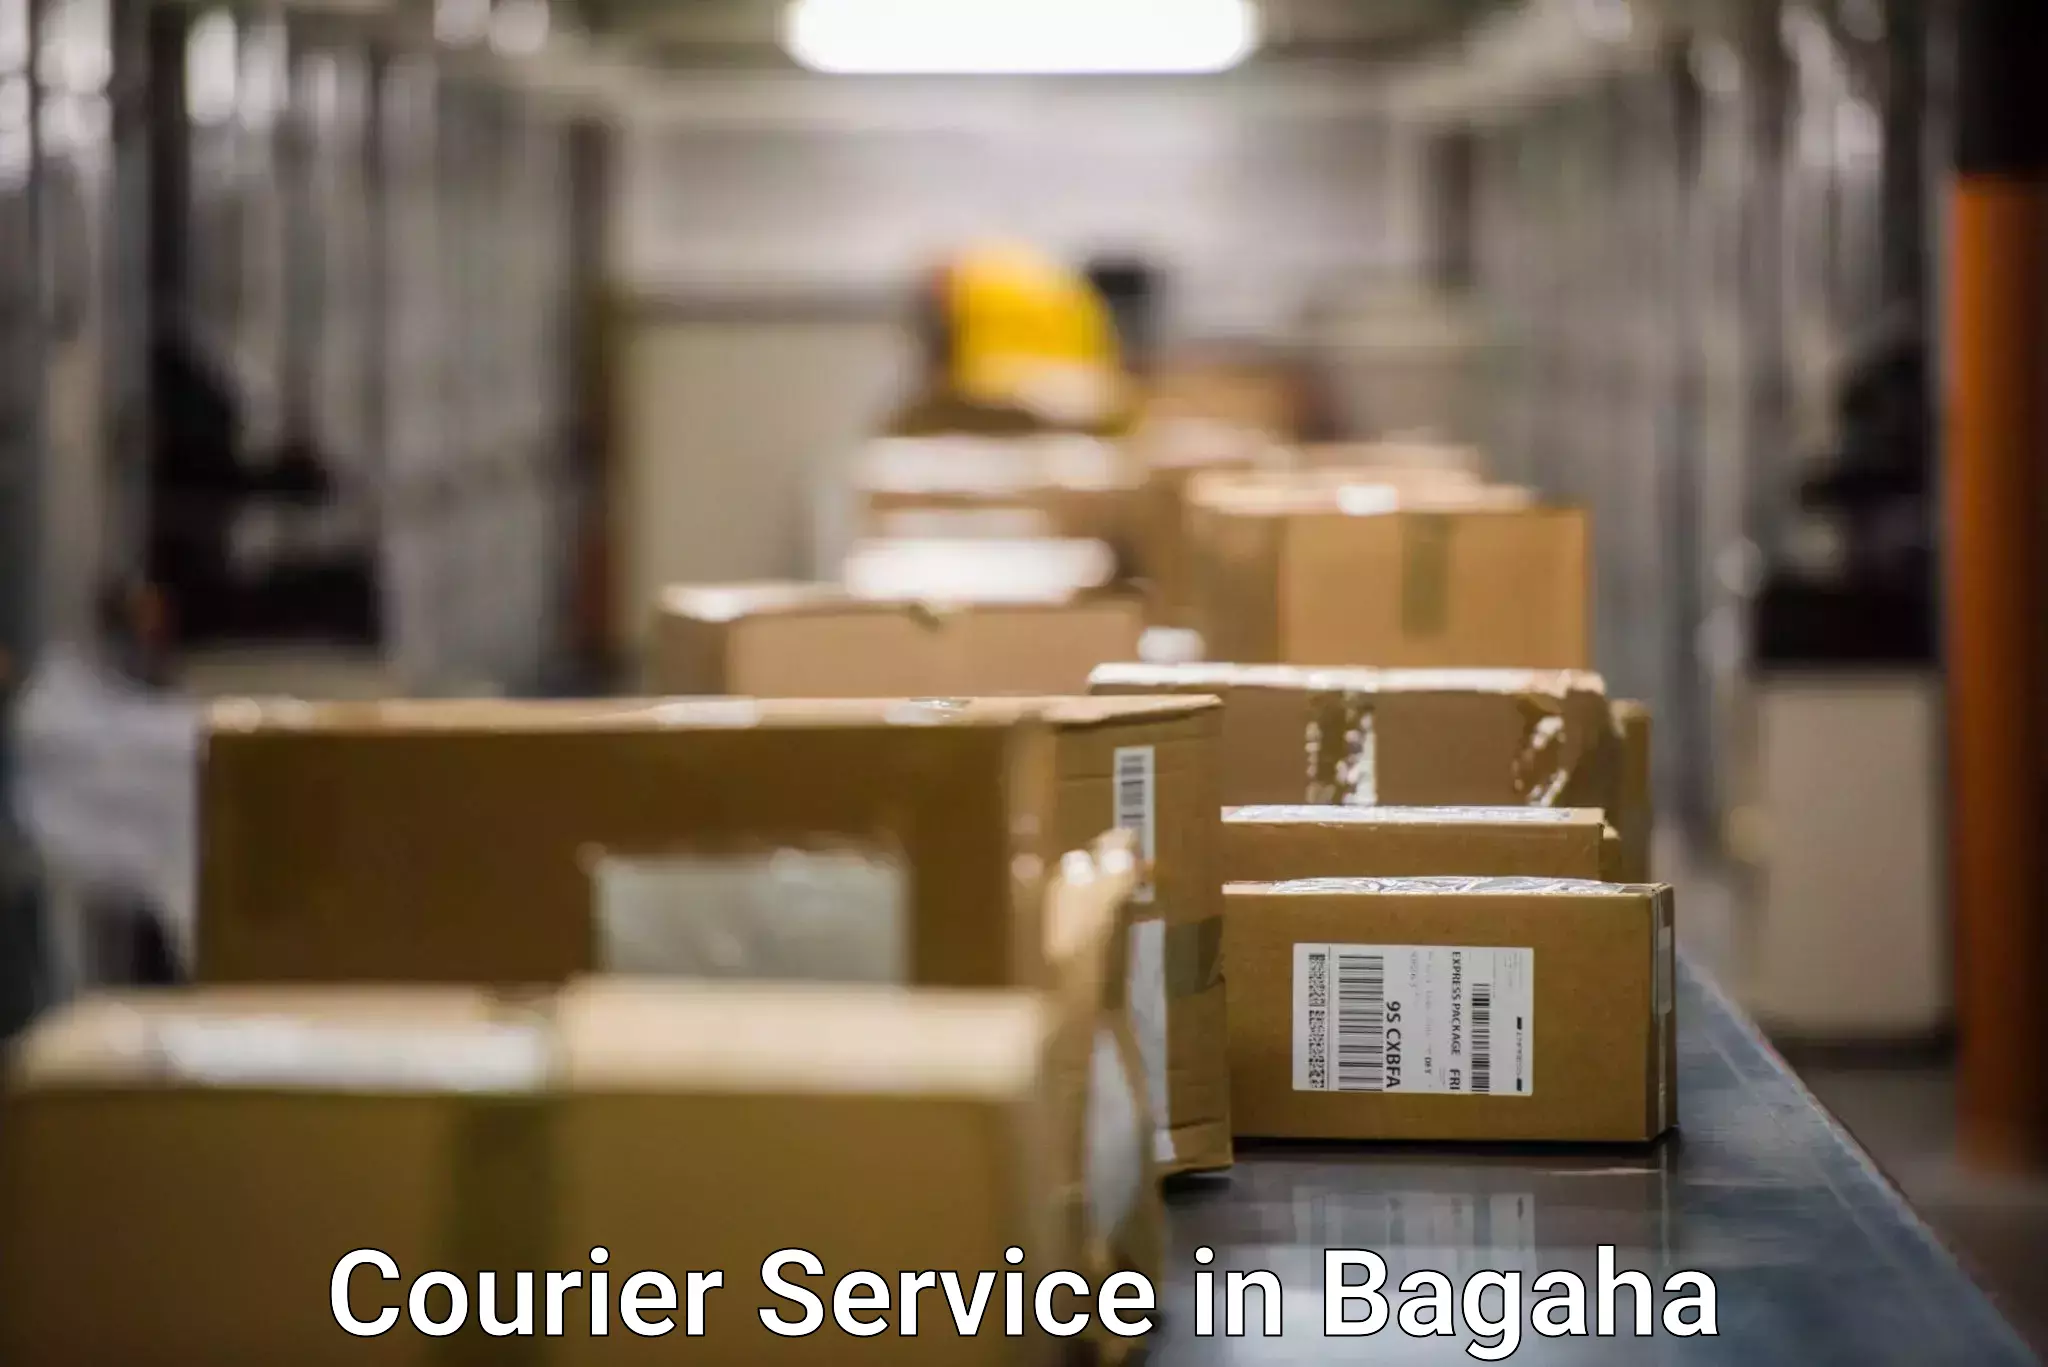 Advanced delivery network in Bagaha